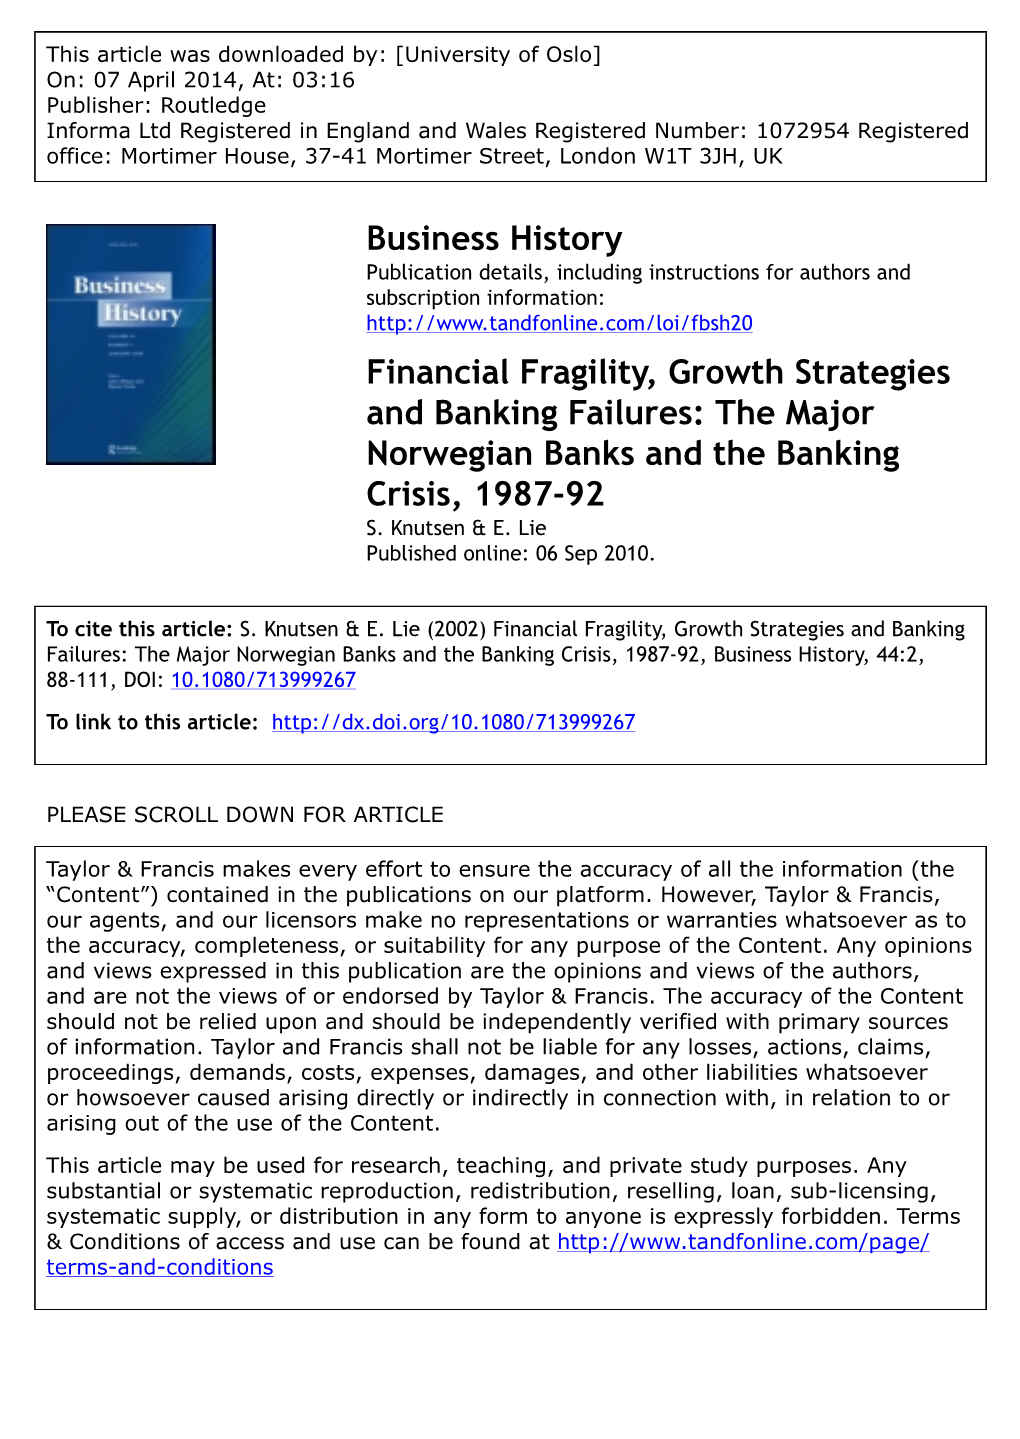 Business History Financial Fragility, Growth Strategies and Banking